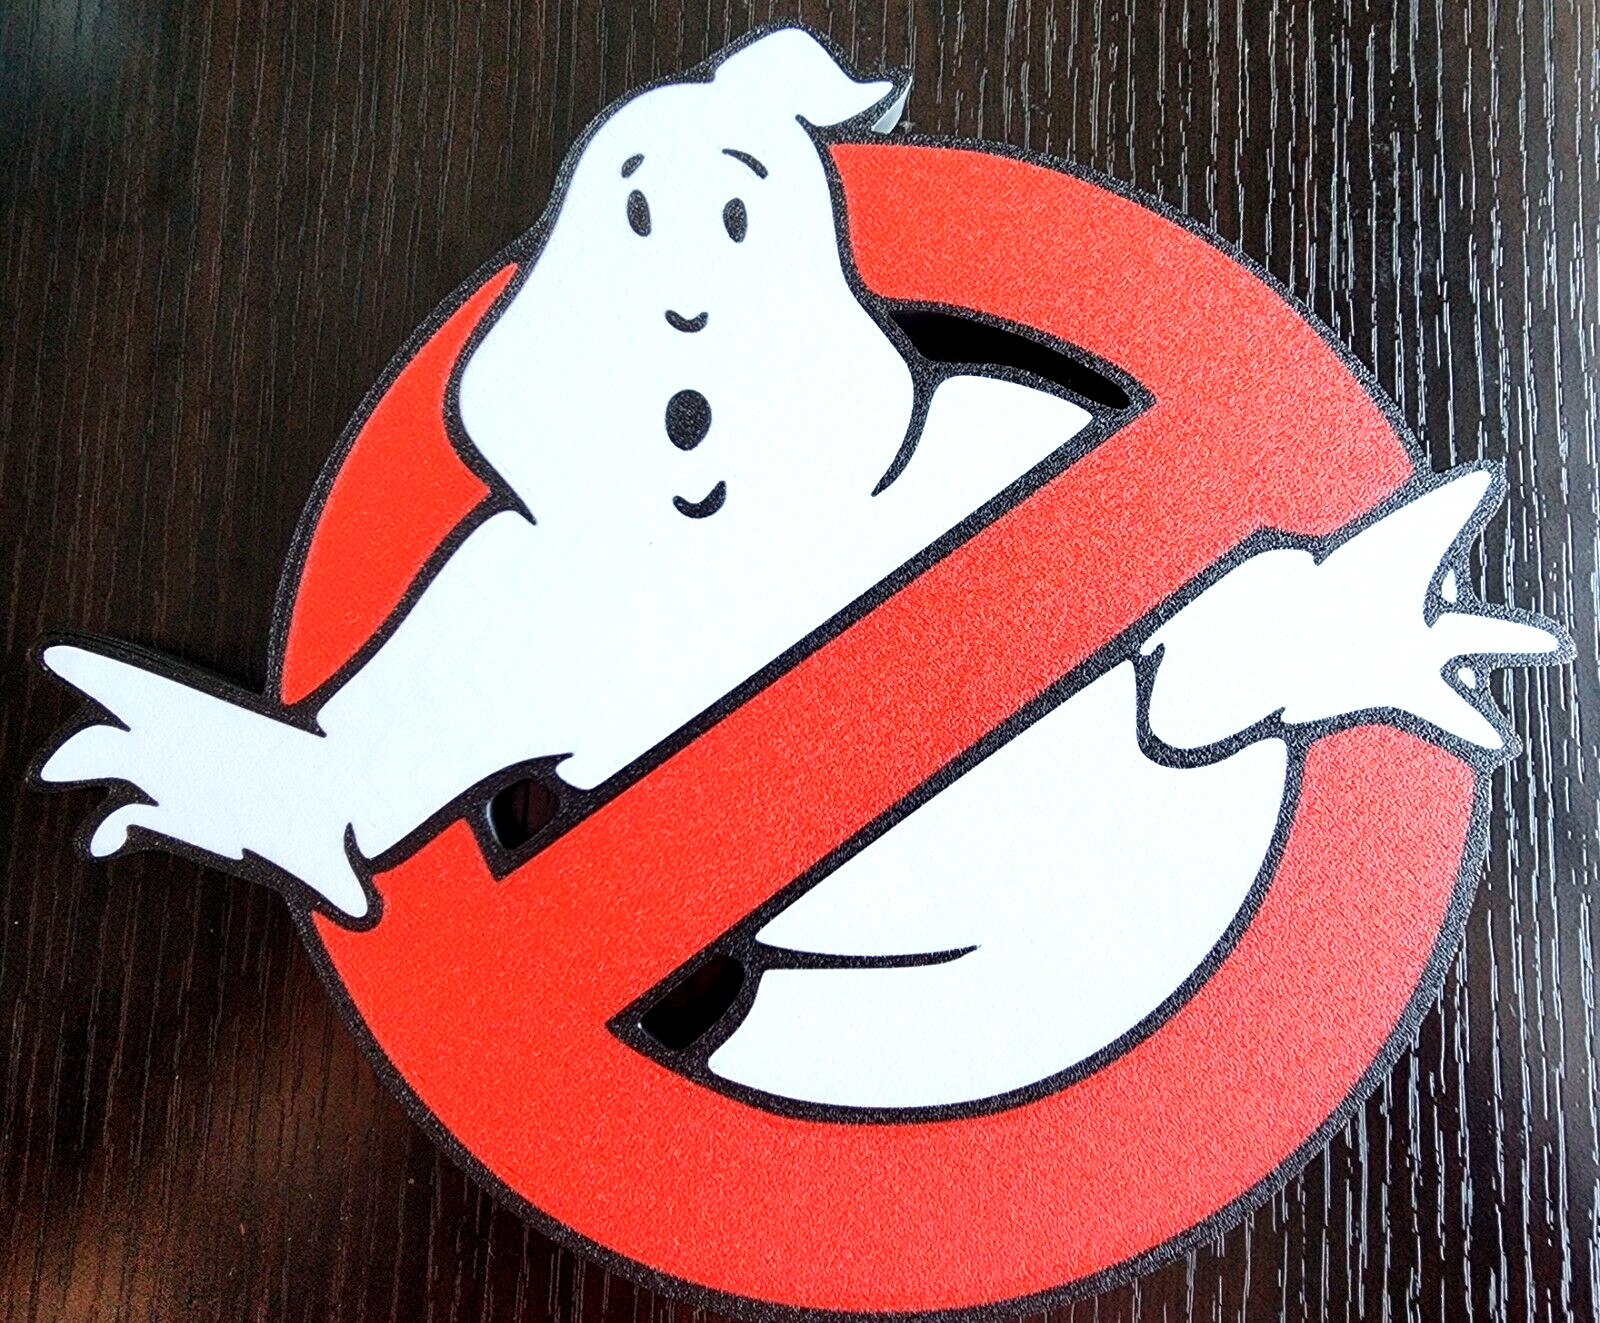 Ghostbusters Inspired LOGO 3D Printed Plaque, Wall Decor, Iconic Movie Emblem